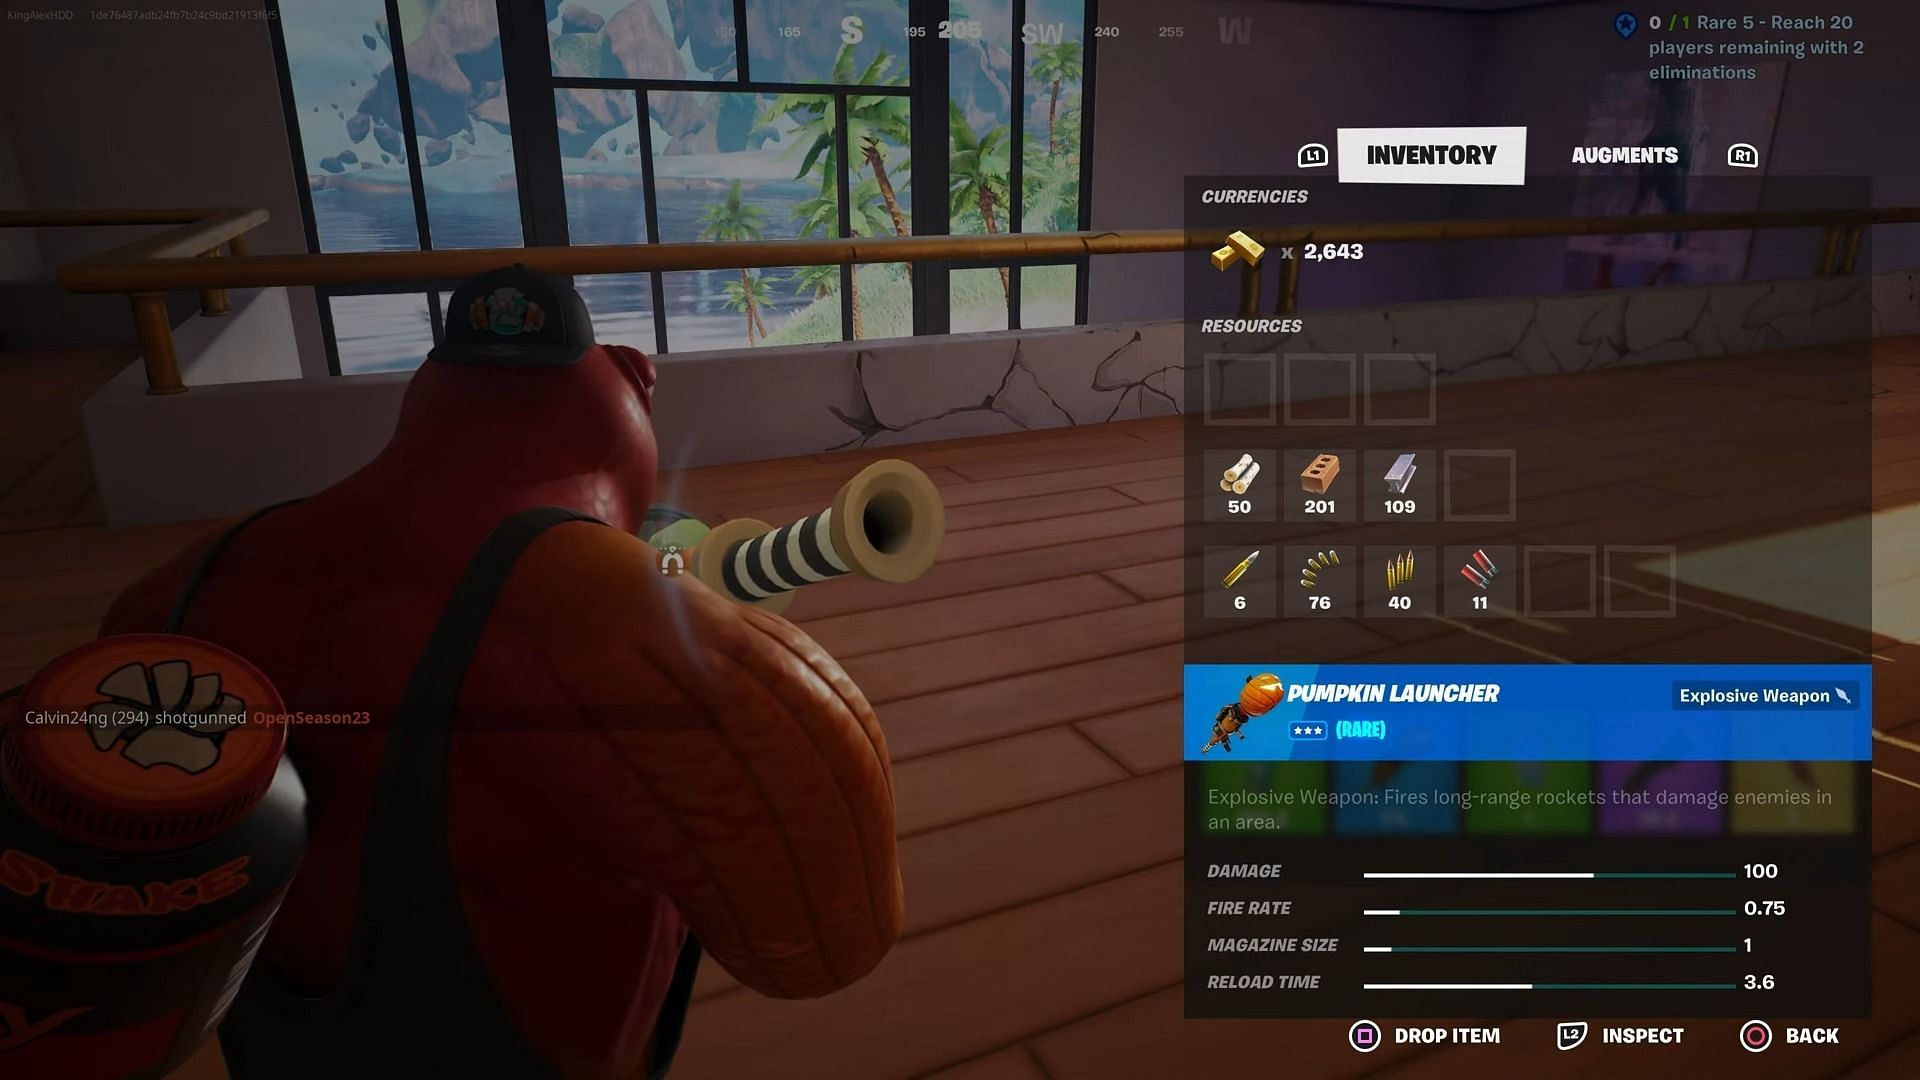 Rare Pumpkin Launcher stats in-game. (Image via Epic Games)